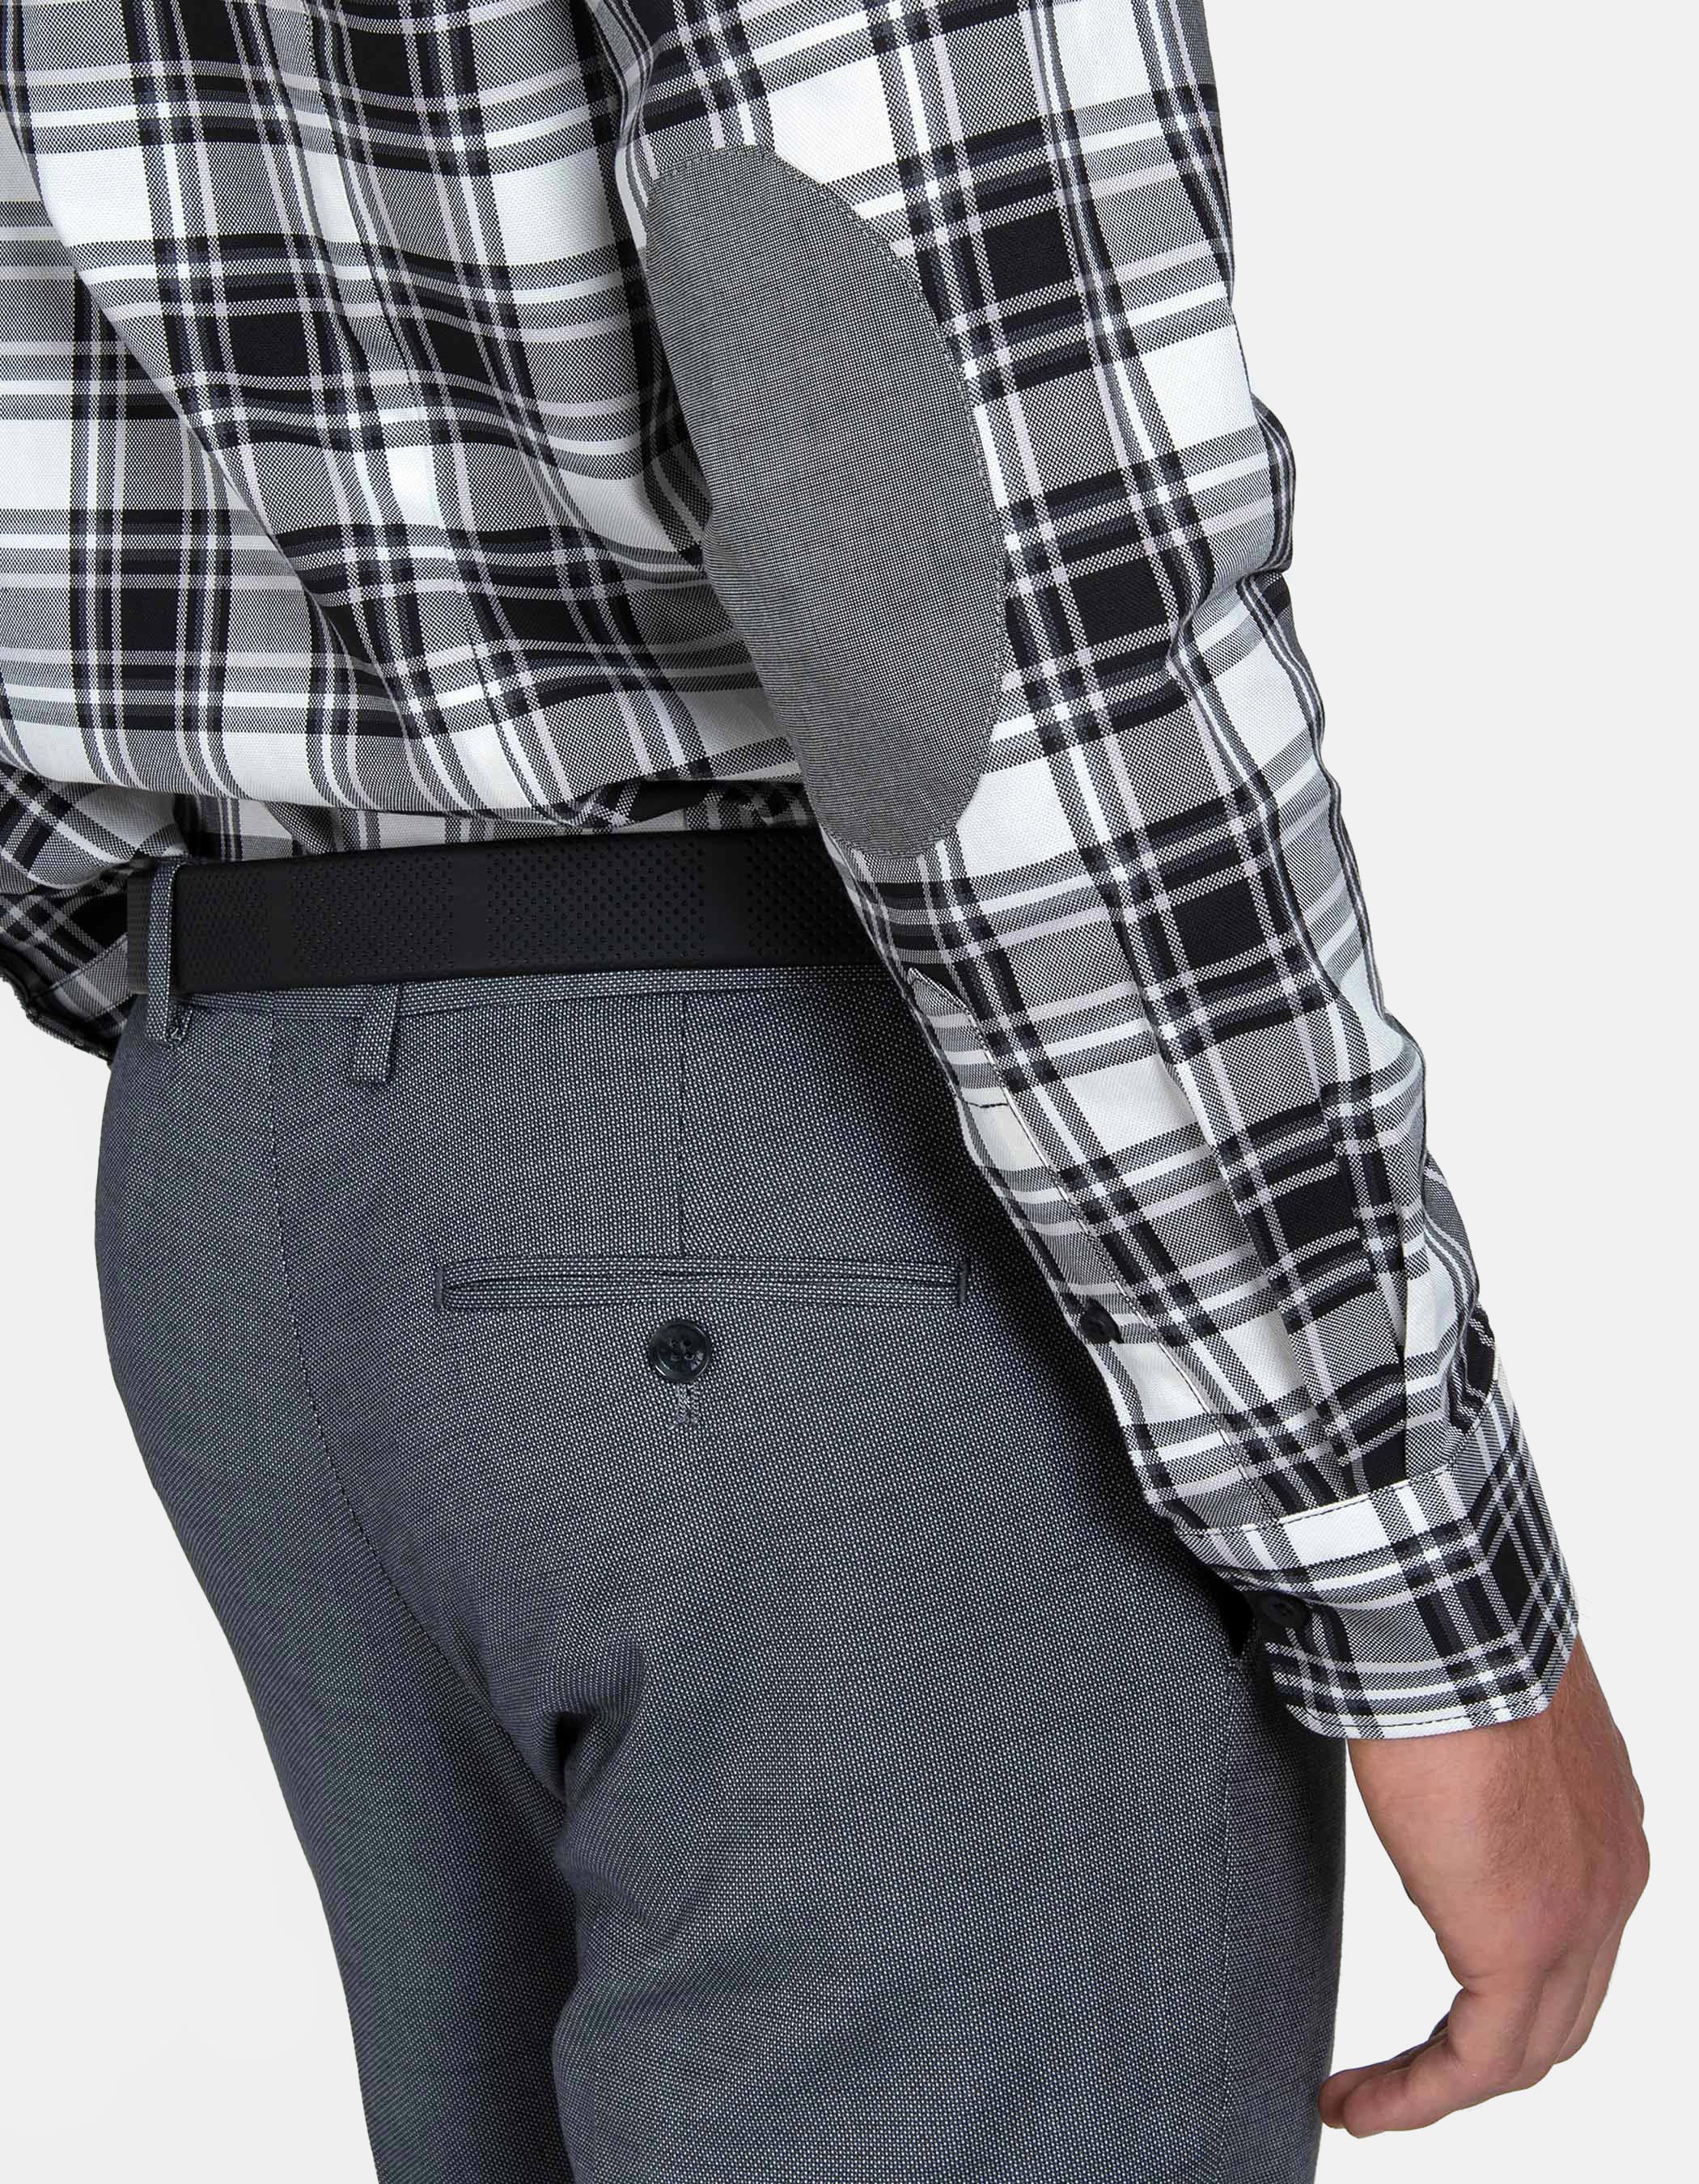 Checked shirt elbow patches 2